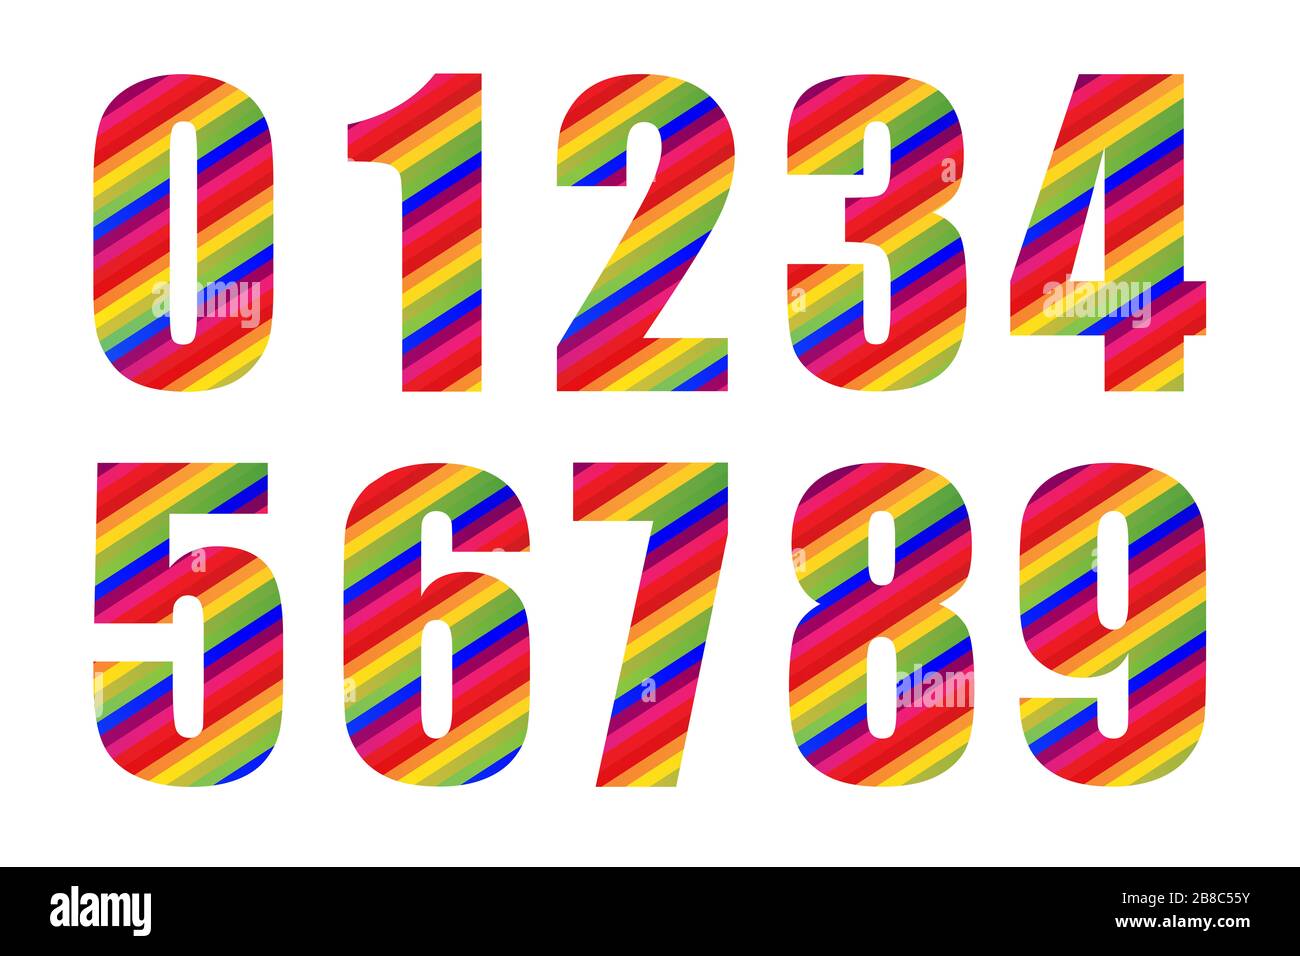 0 1 2 3 4 5 6 7 8 9 Rainbow Numeral Colorful Number Vector Illustration Design Isolated On White Background Stock Photo Alamy